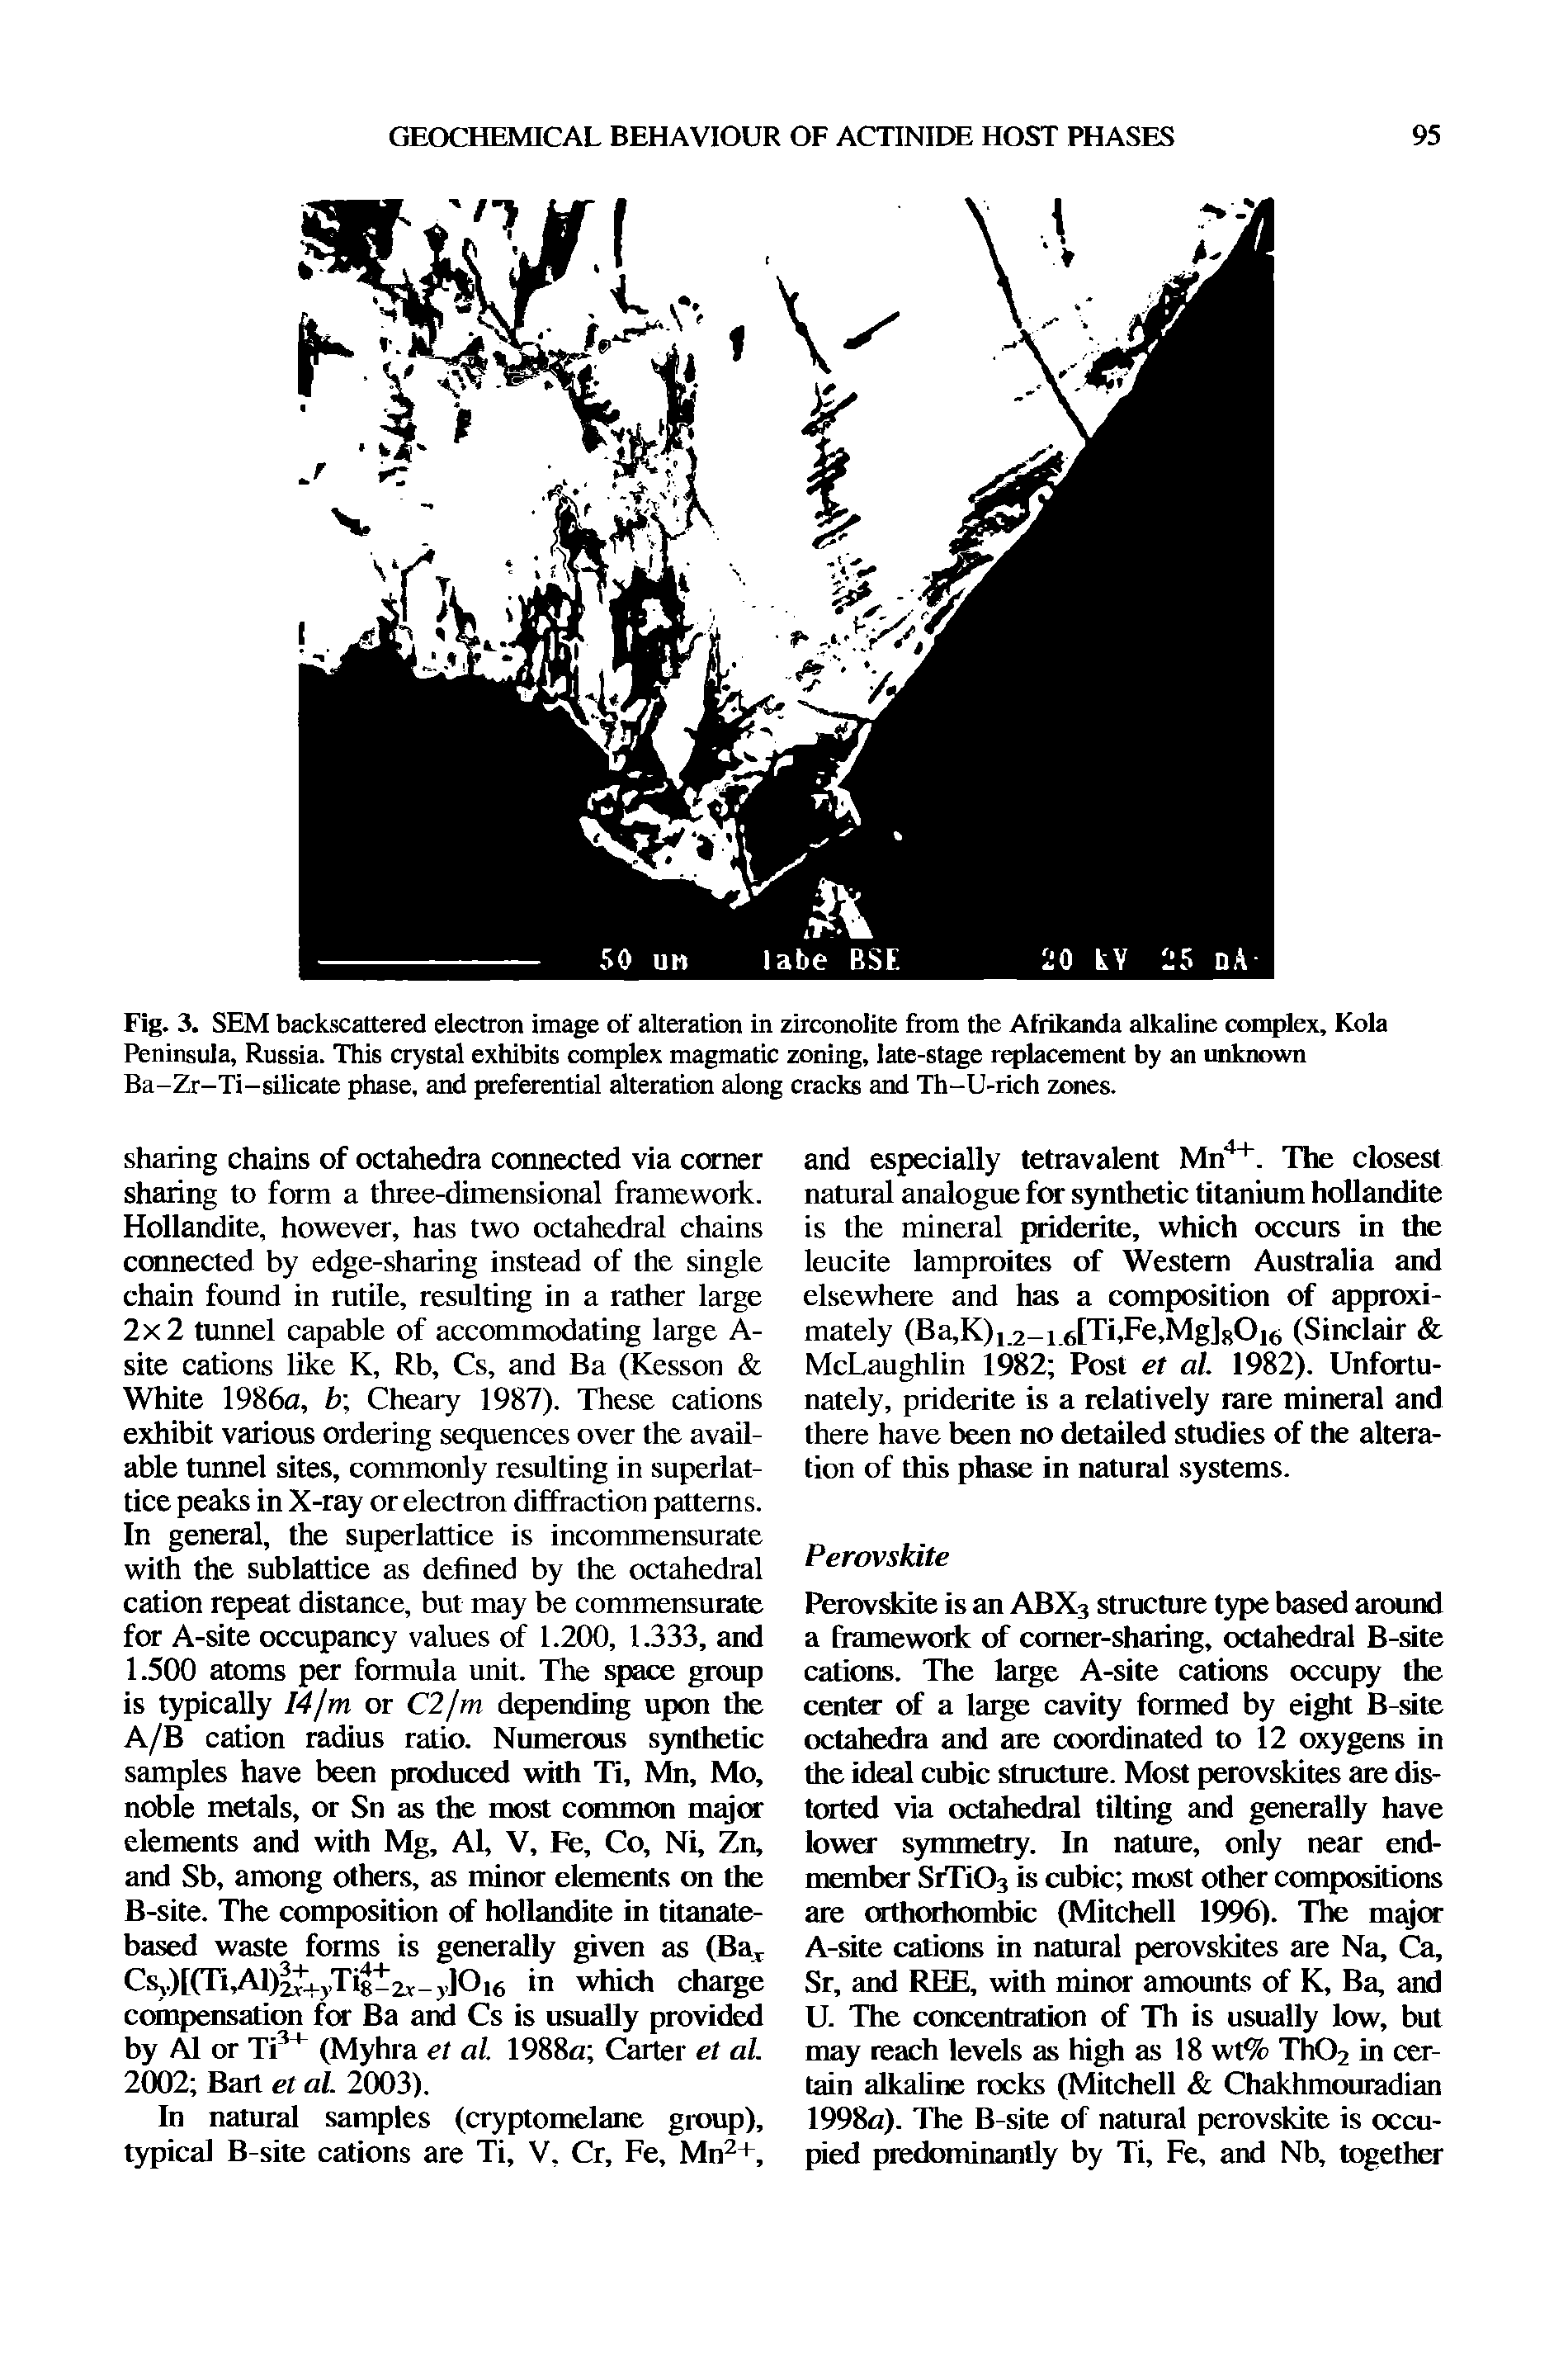 Fig. 3. SEM backscattered electron image of alteration in zirconolite from the Afrikanda alkaline complex, Kola Peninsula, Russia. This crystal exhibits complex magmatic zoning, late-stage replacement by an unknown Ba-Zr-Ti-silicate phase, and preferential alteration along cracks and Th-U-rich zones.